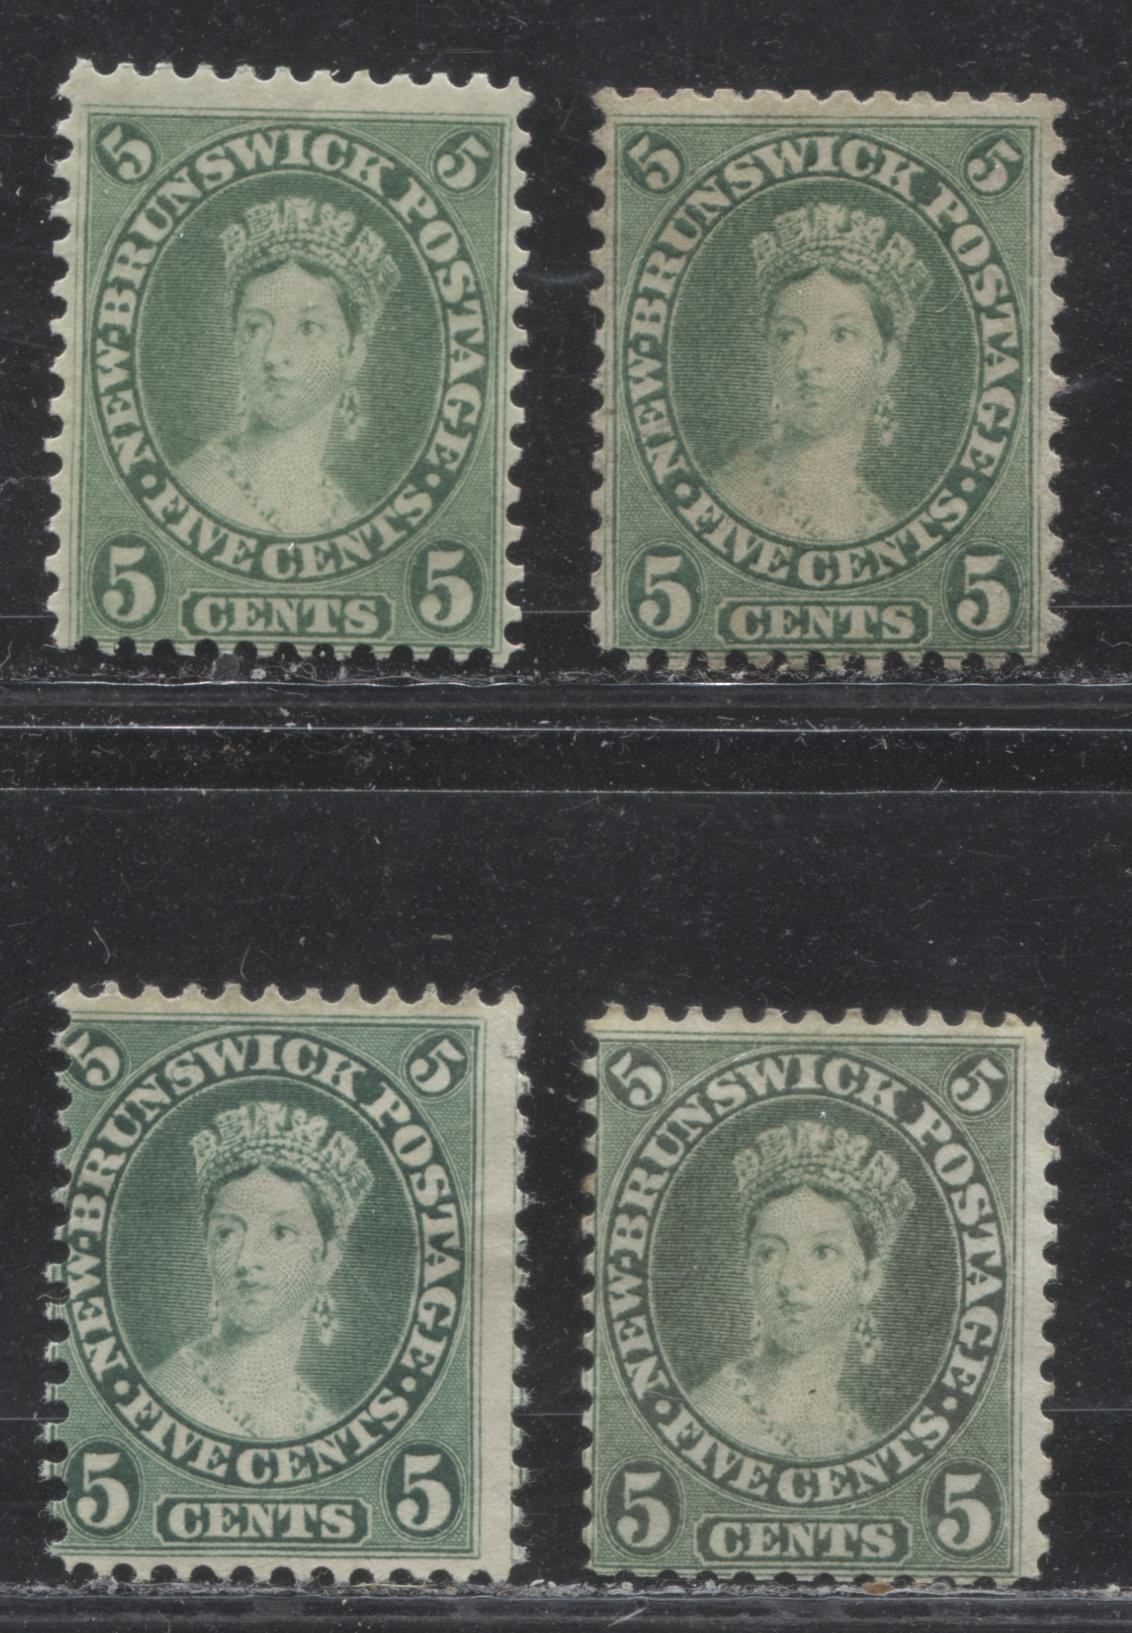 Lot 3 New Brunswick #8,a,b 5c Yellow Green, Blue Green & Olive Green Queen Victoria, 1860-1867 Cents Issue, 4 Fine Unused Singles, Perfs 12, 12 x 11.75 and 11.75 x 12